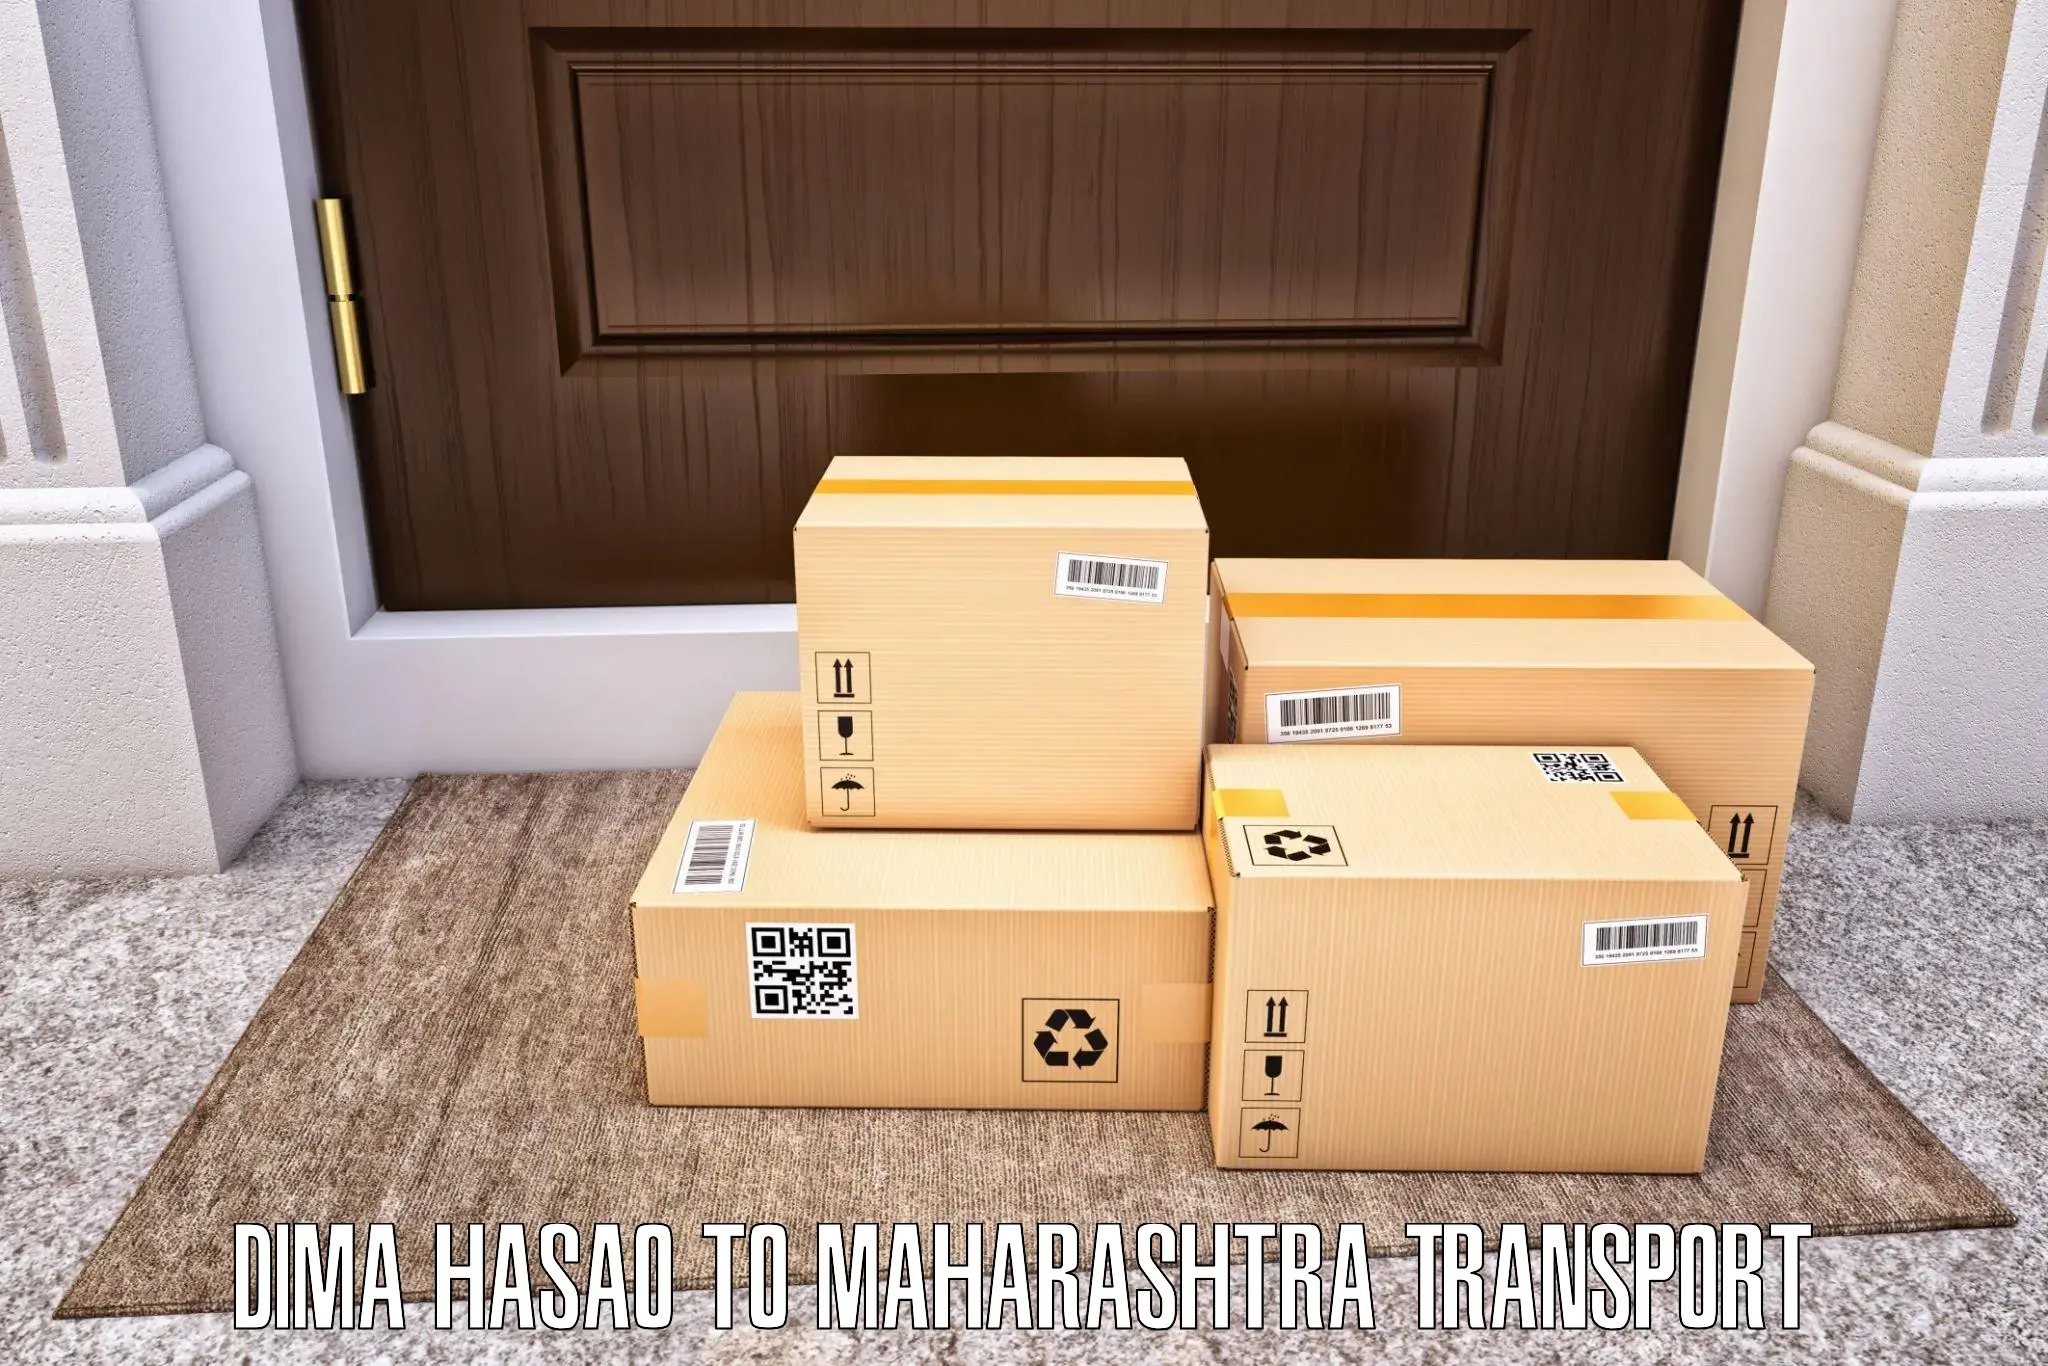 Parcel transport services Dima Hasao to Dongarkinhi